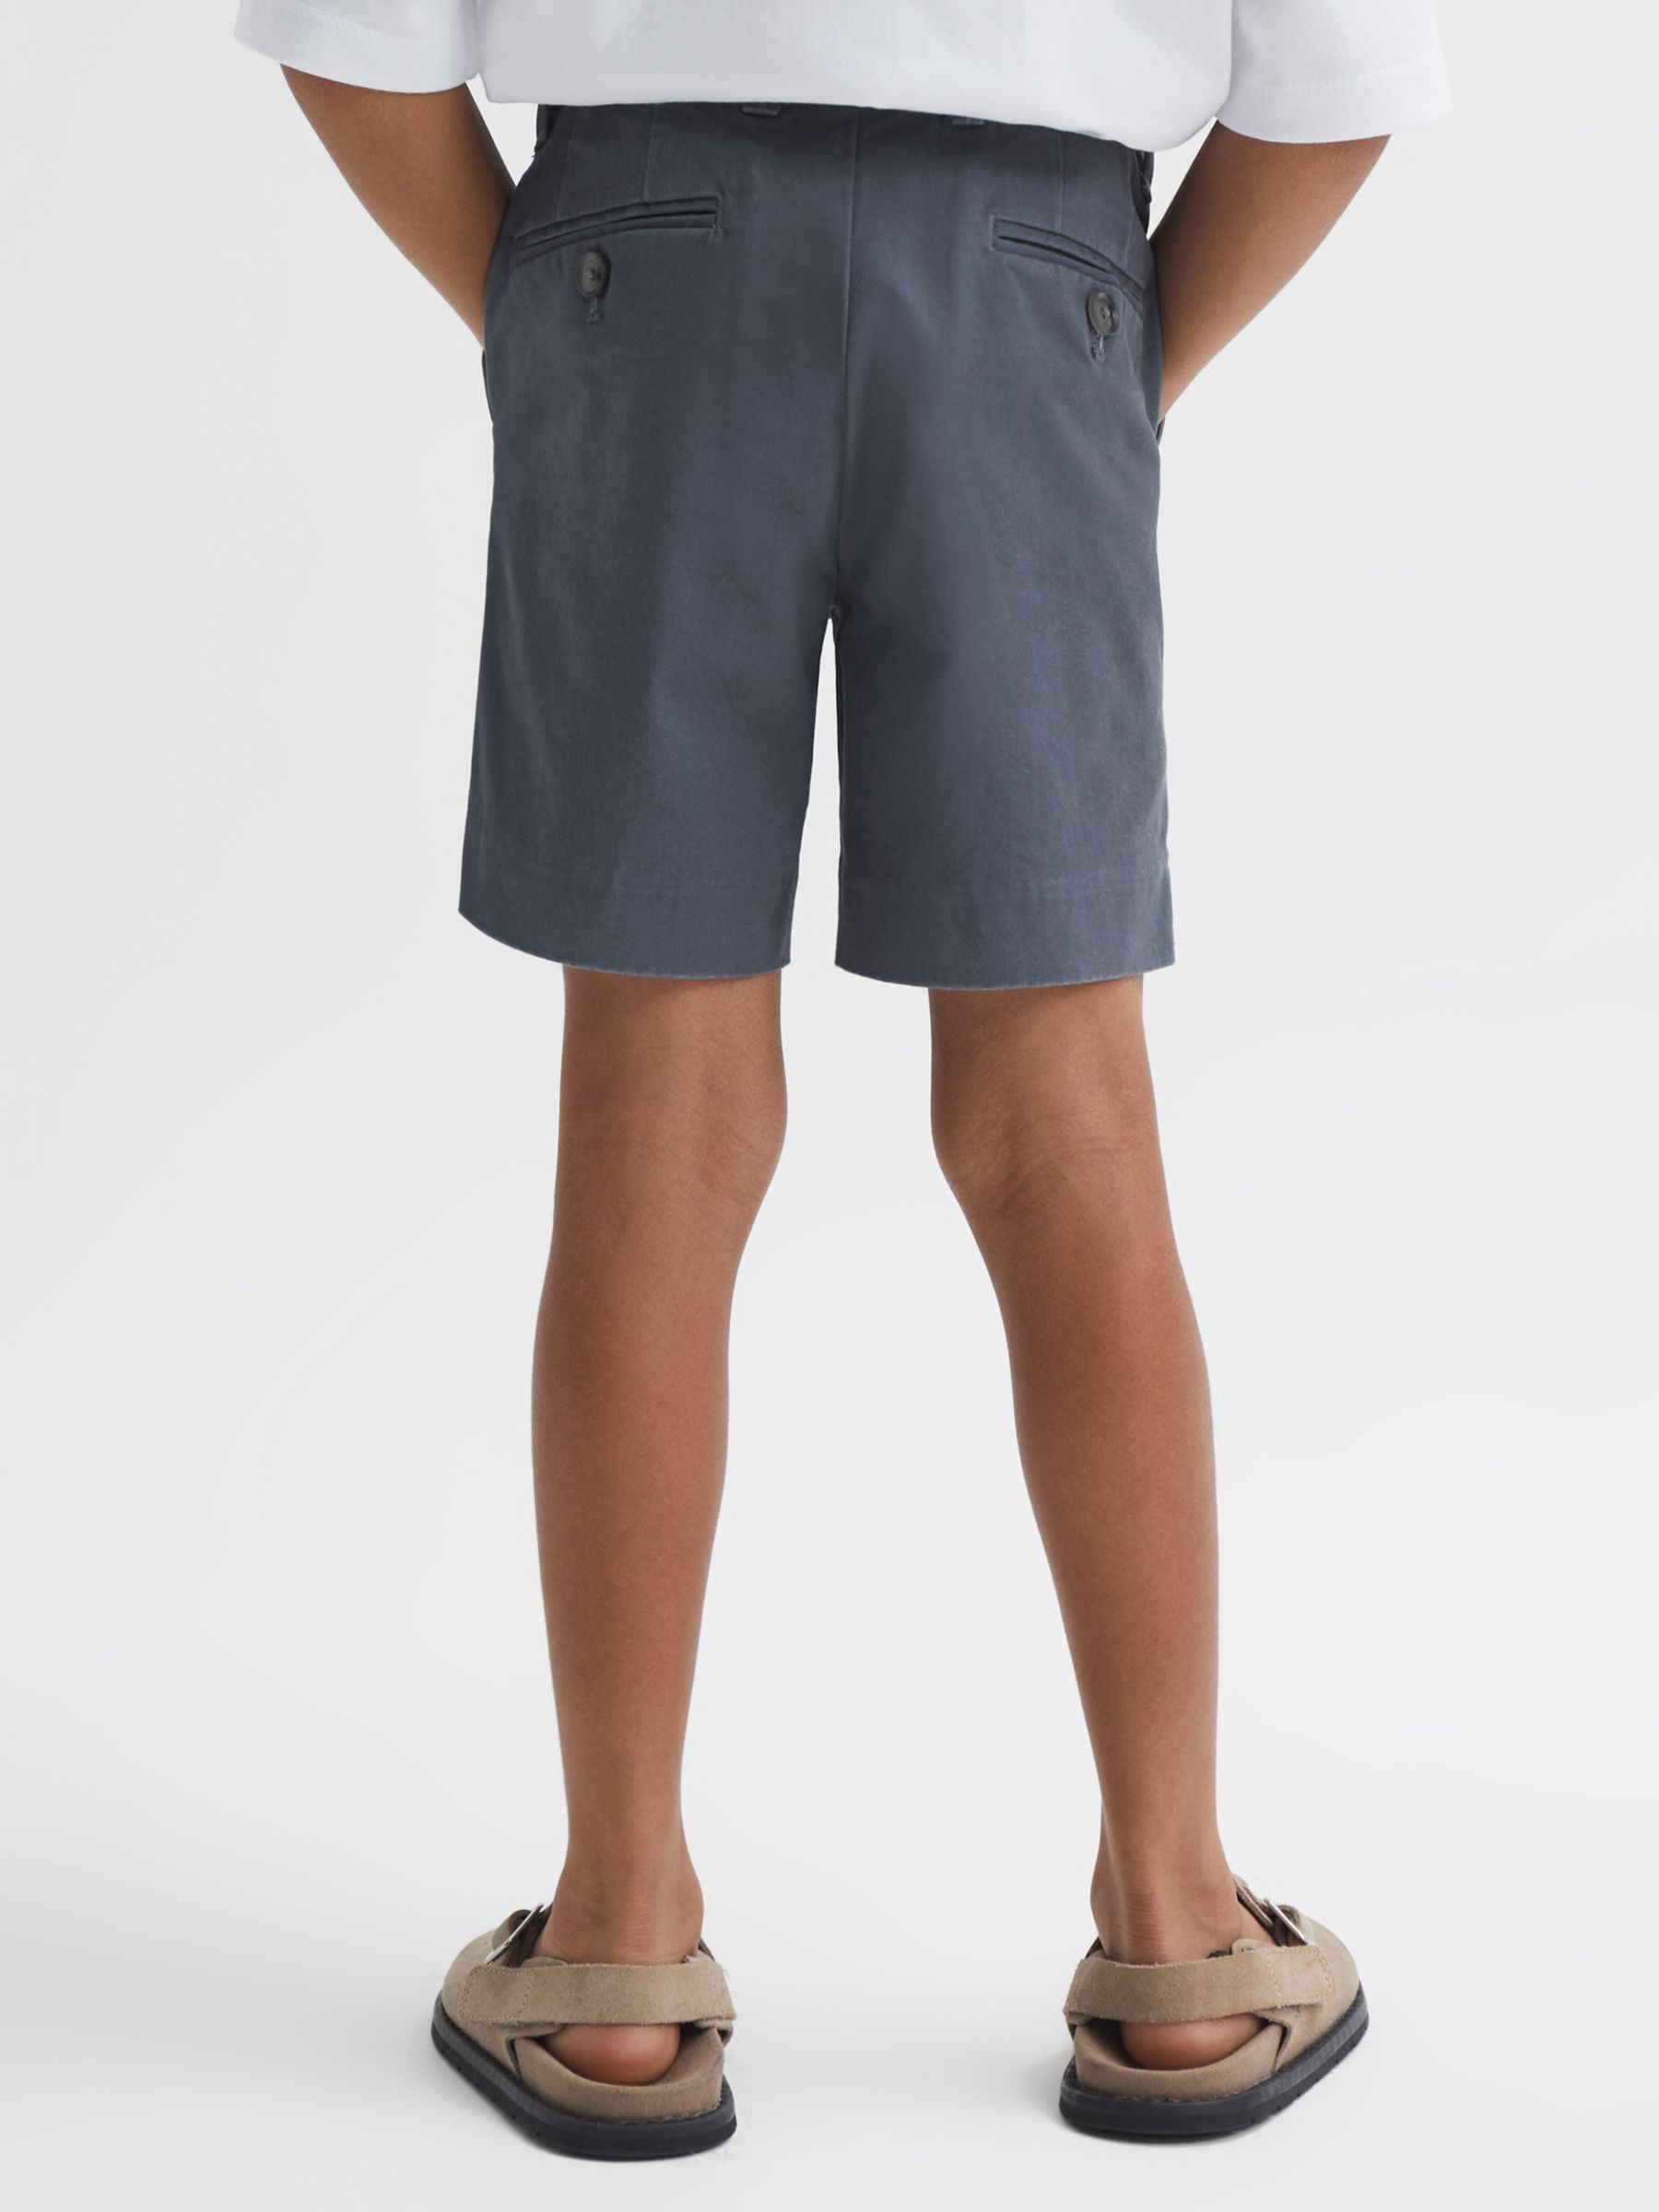 Buy Reiss Kids' Wicket Cotton Blend Casual Chino Shorts Online at johnlewis.com